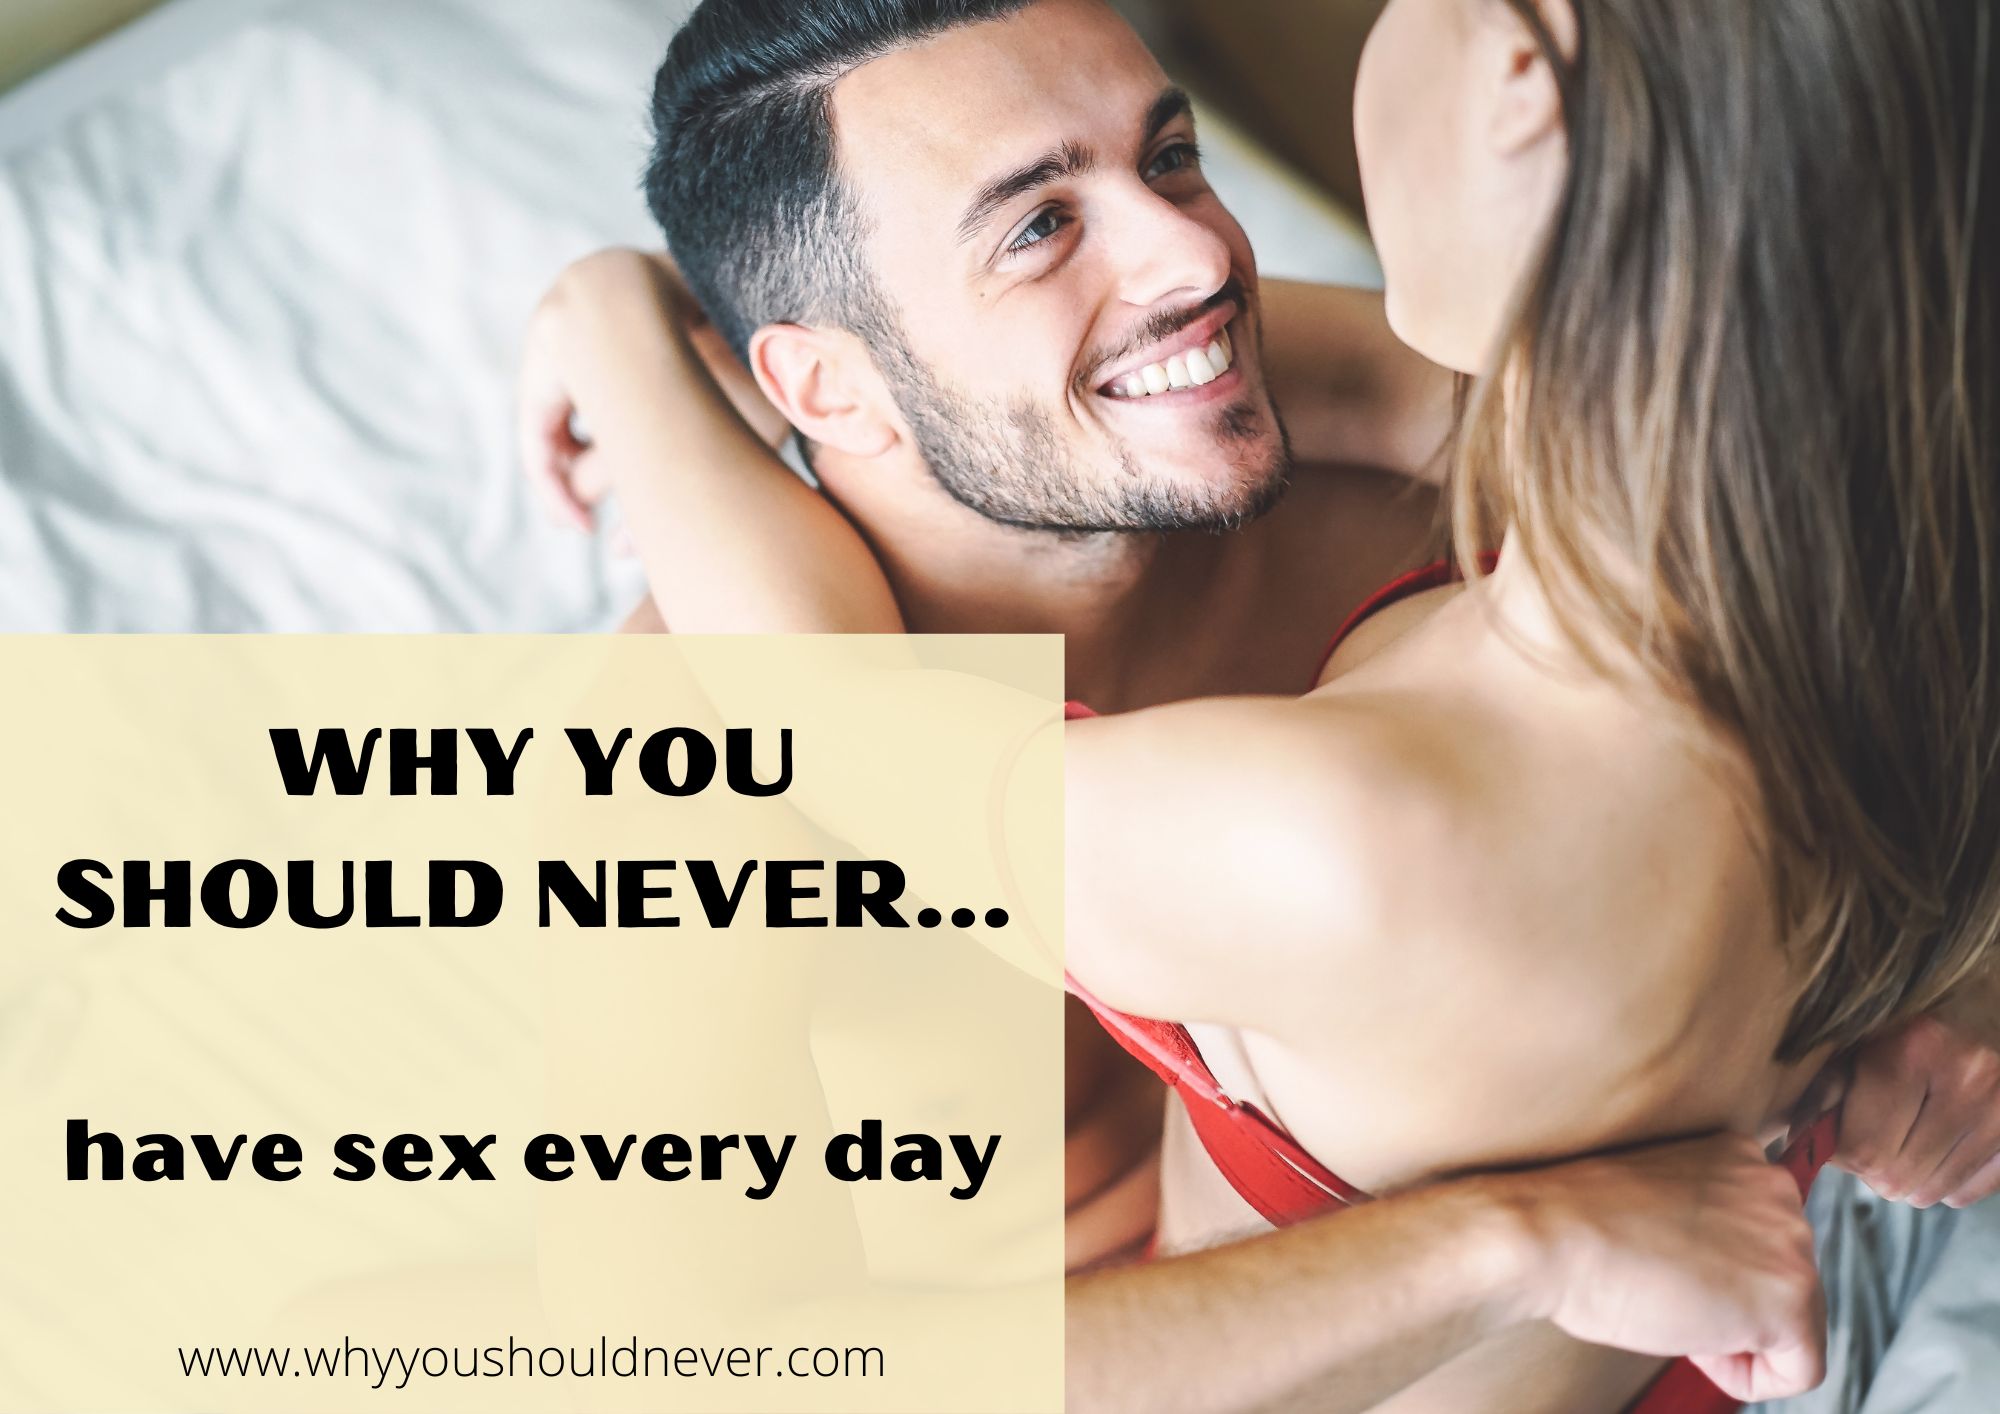 Why You Should Never Have Sex Every Day